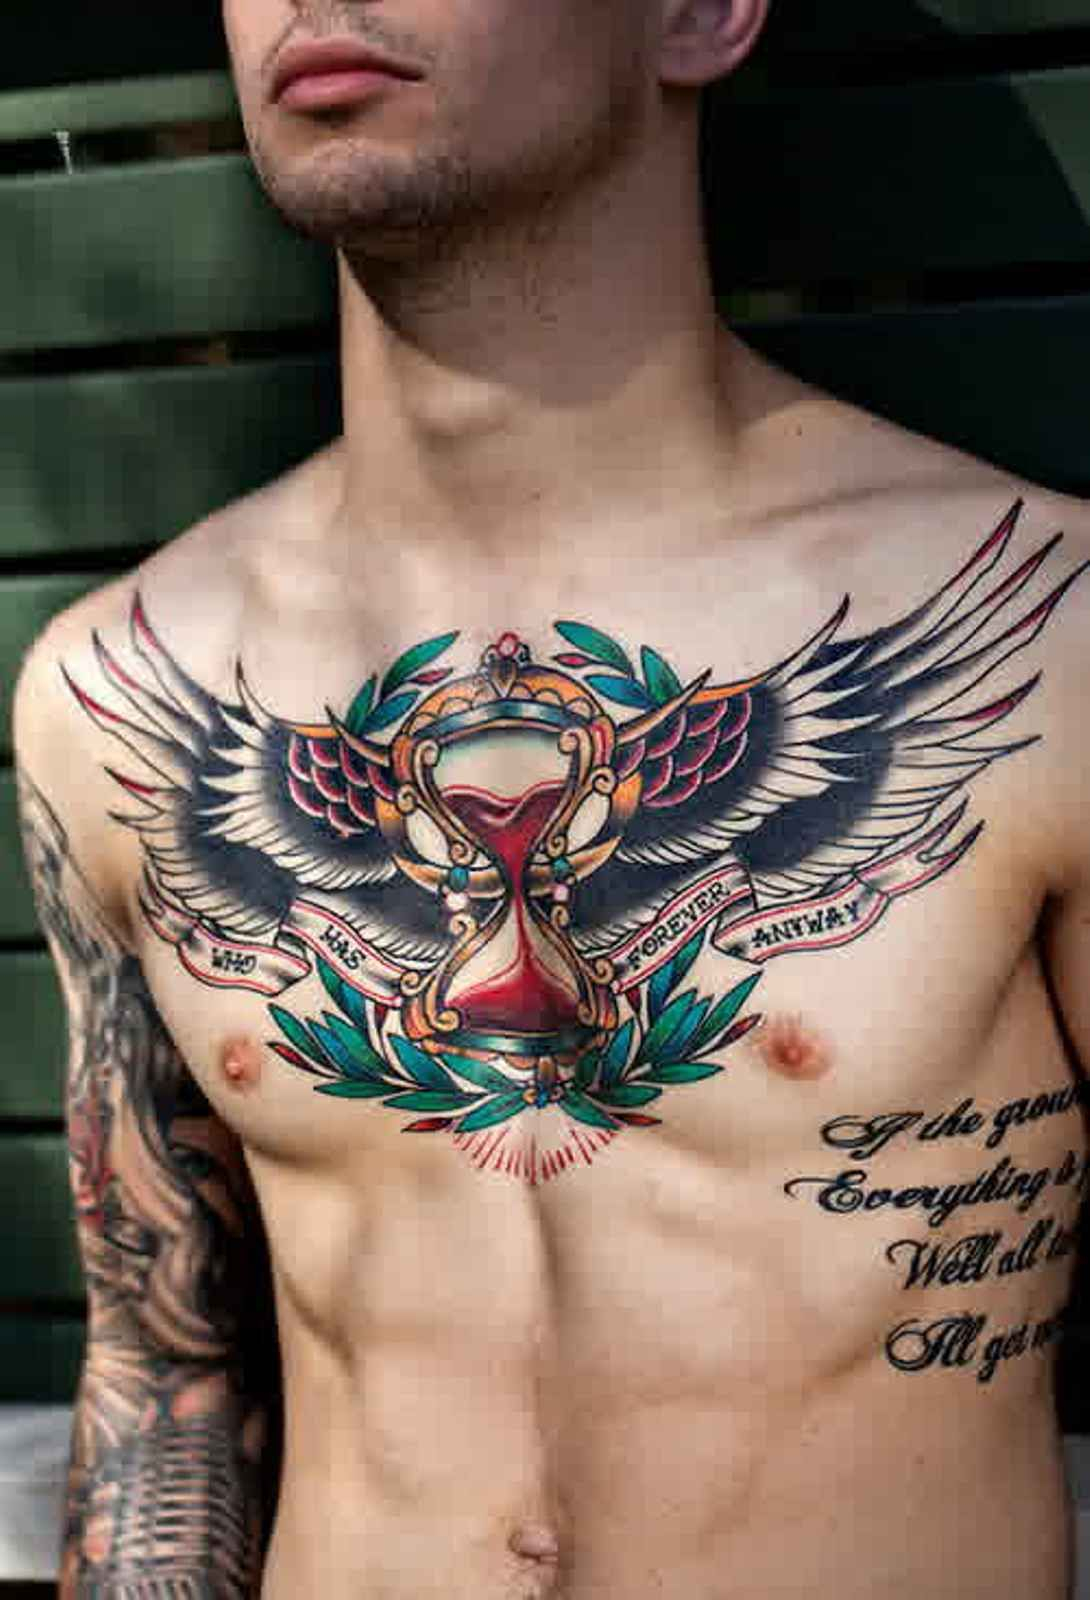 30 Best Chest Tattoos Ideas For Men Inspiration Tattoos Chest pertaining to dimensions 1090 X 1600